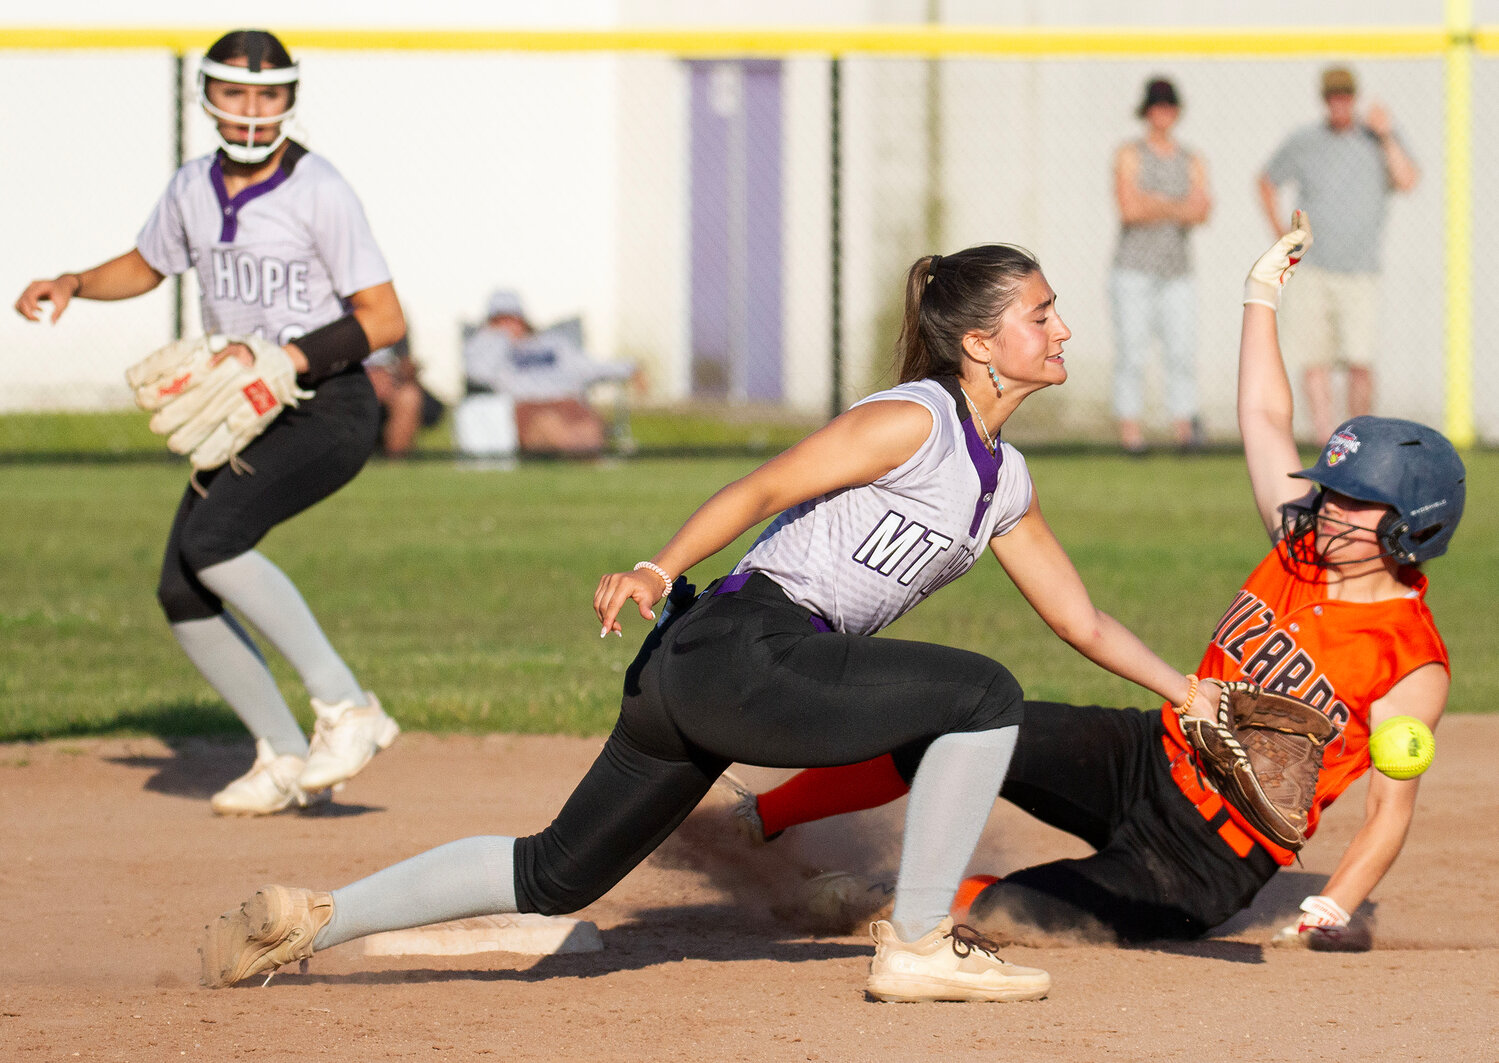 Shortstop Julia Allen scoops up a throw by catcher Ava Waddell on a West Warwick steal of second base.